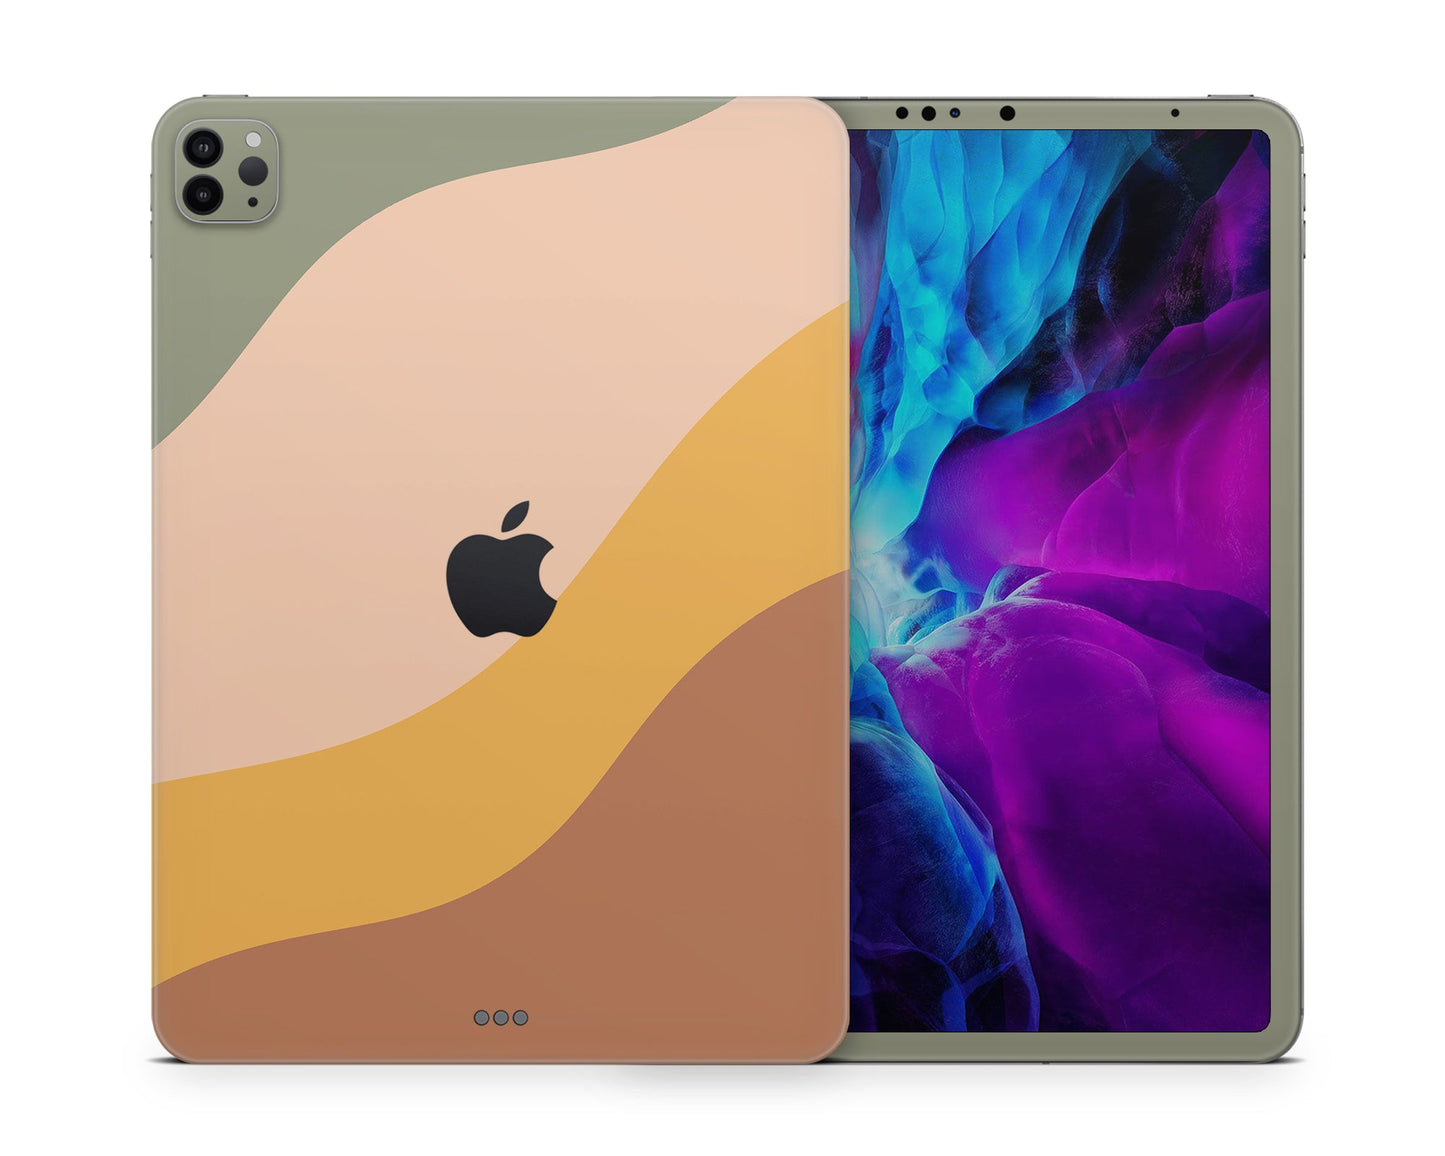 Lux Skins iPad Tuscan Summer iPad Pro 12.9" Gen 5 Skins - Solid Colours Colour Blocking Skin